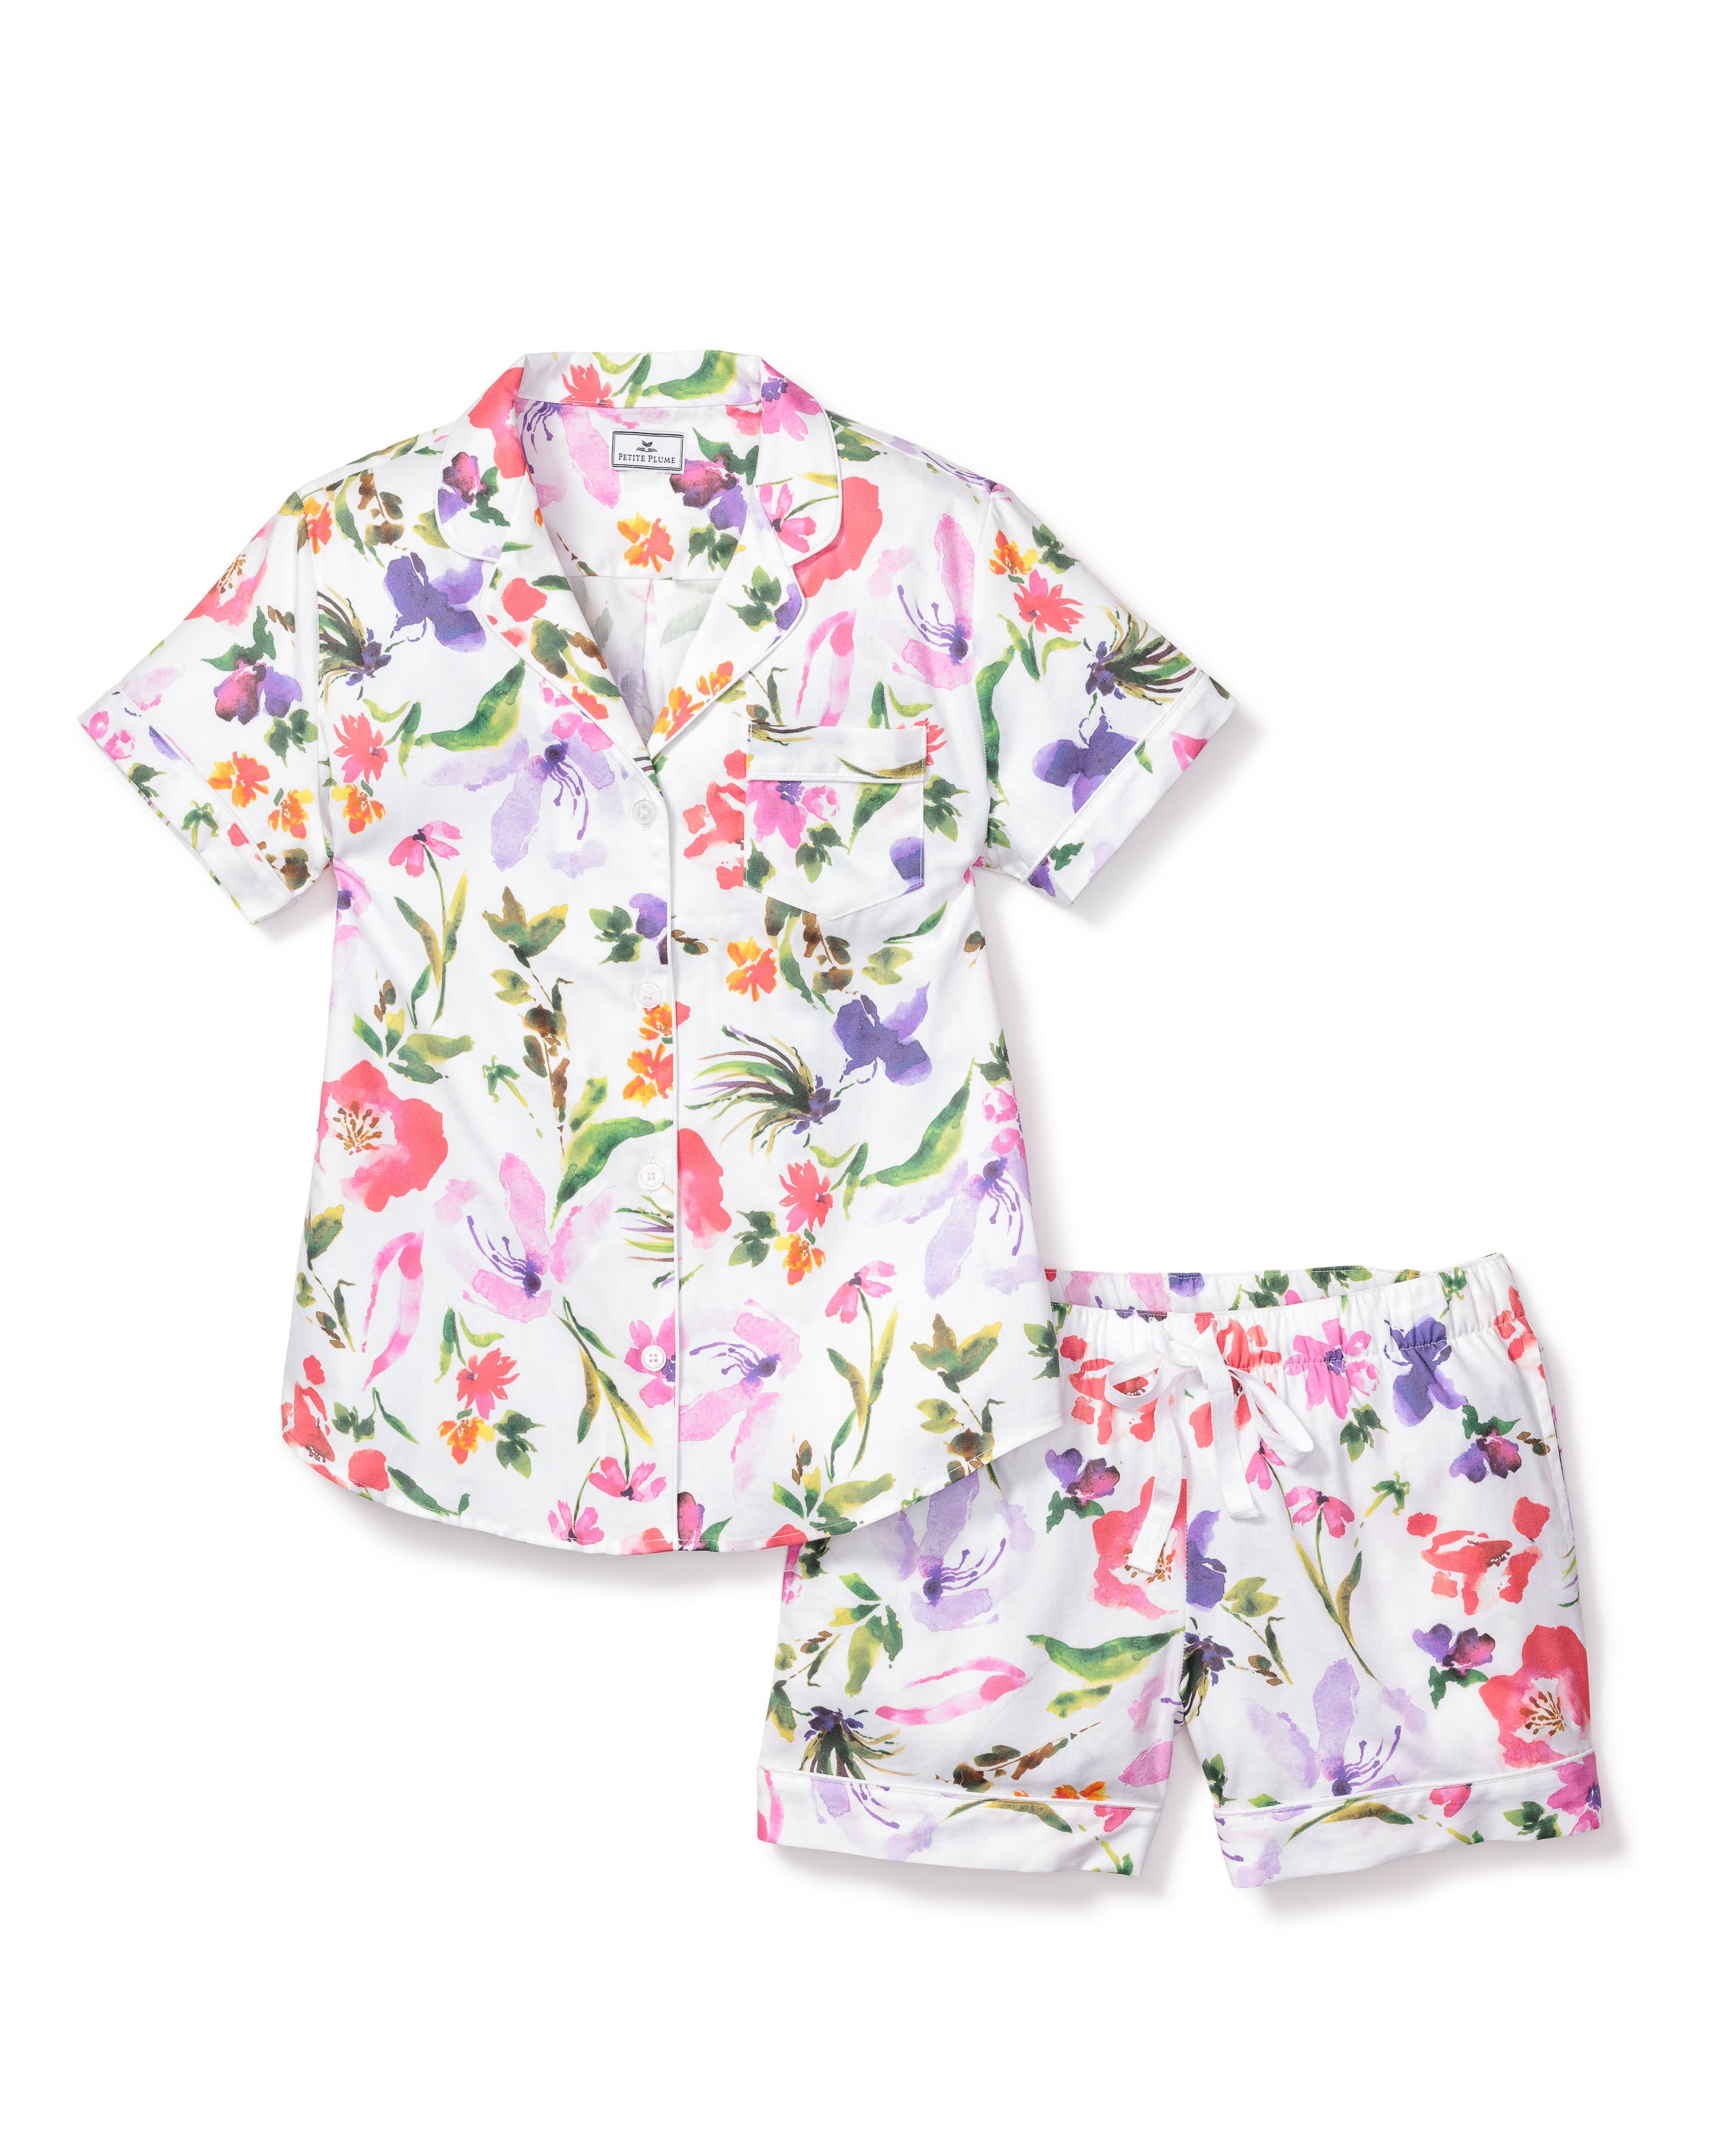 Women's Twill Pajama Short Sleeve Short Set in Gardens of Giverny ...